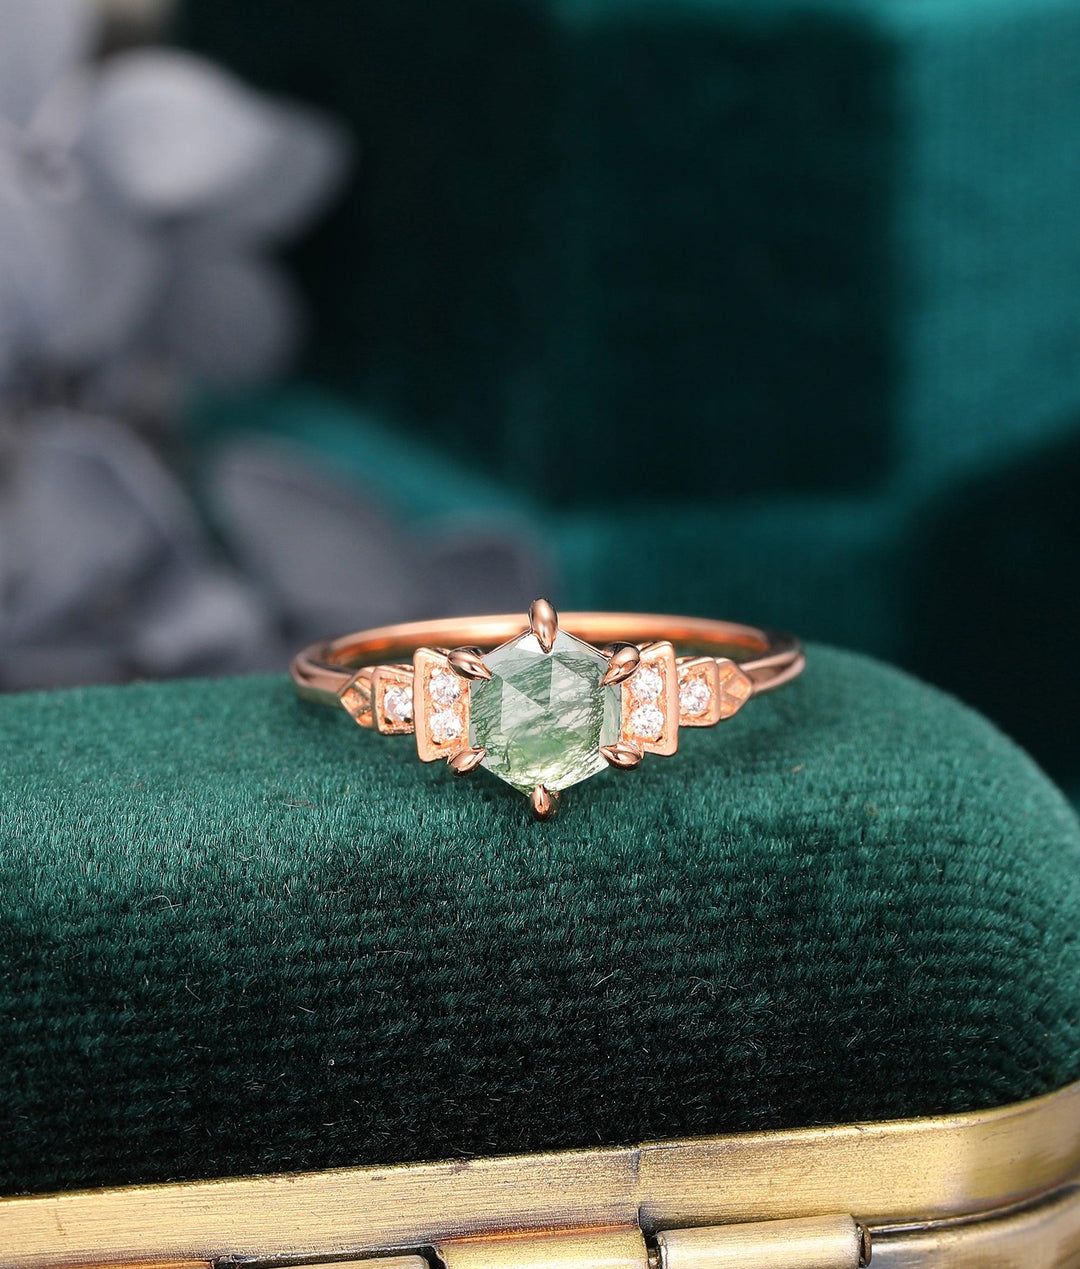 Vintage Hexagon Cut Moss Agate Engagement Ring, Rose Gold Silver Anniversary Promise Ring Gifts - Esdomera